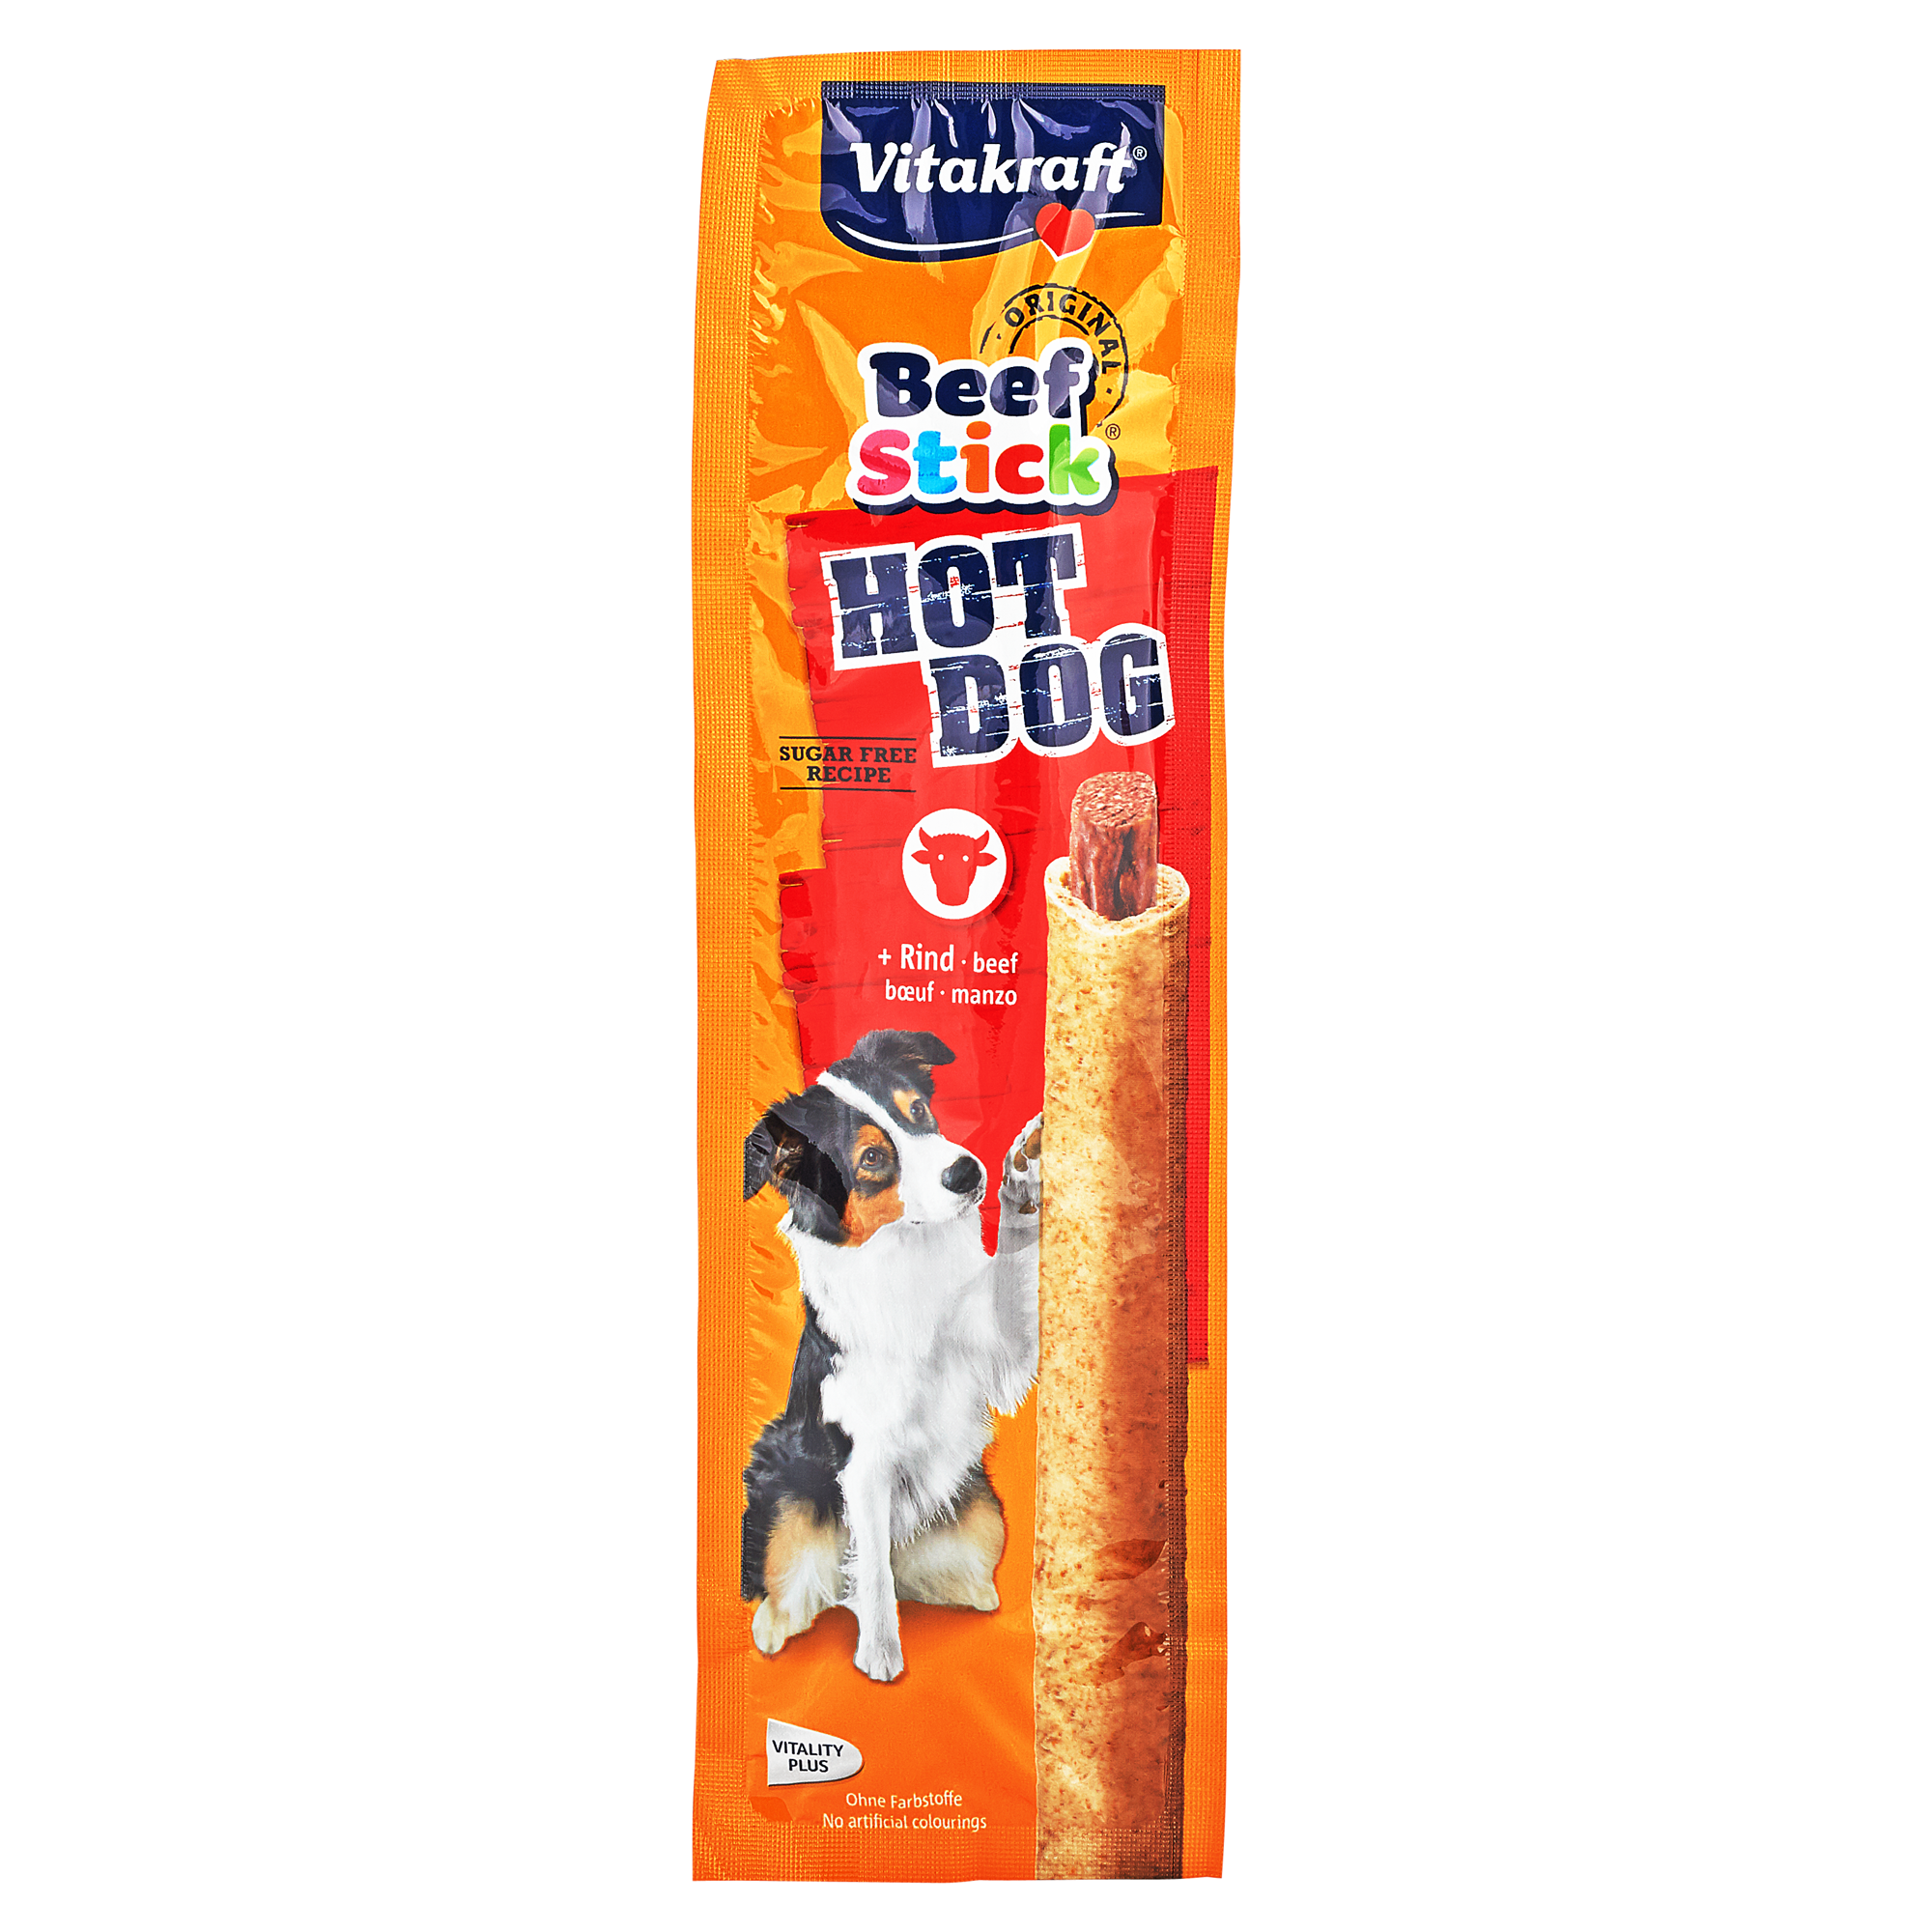 Kausnack "Beef Stick" Hot Dog mit Rind 30 g + product picture